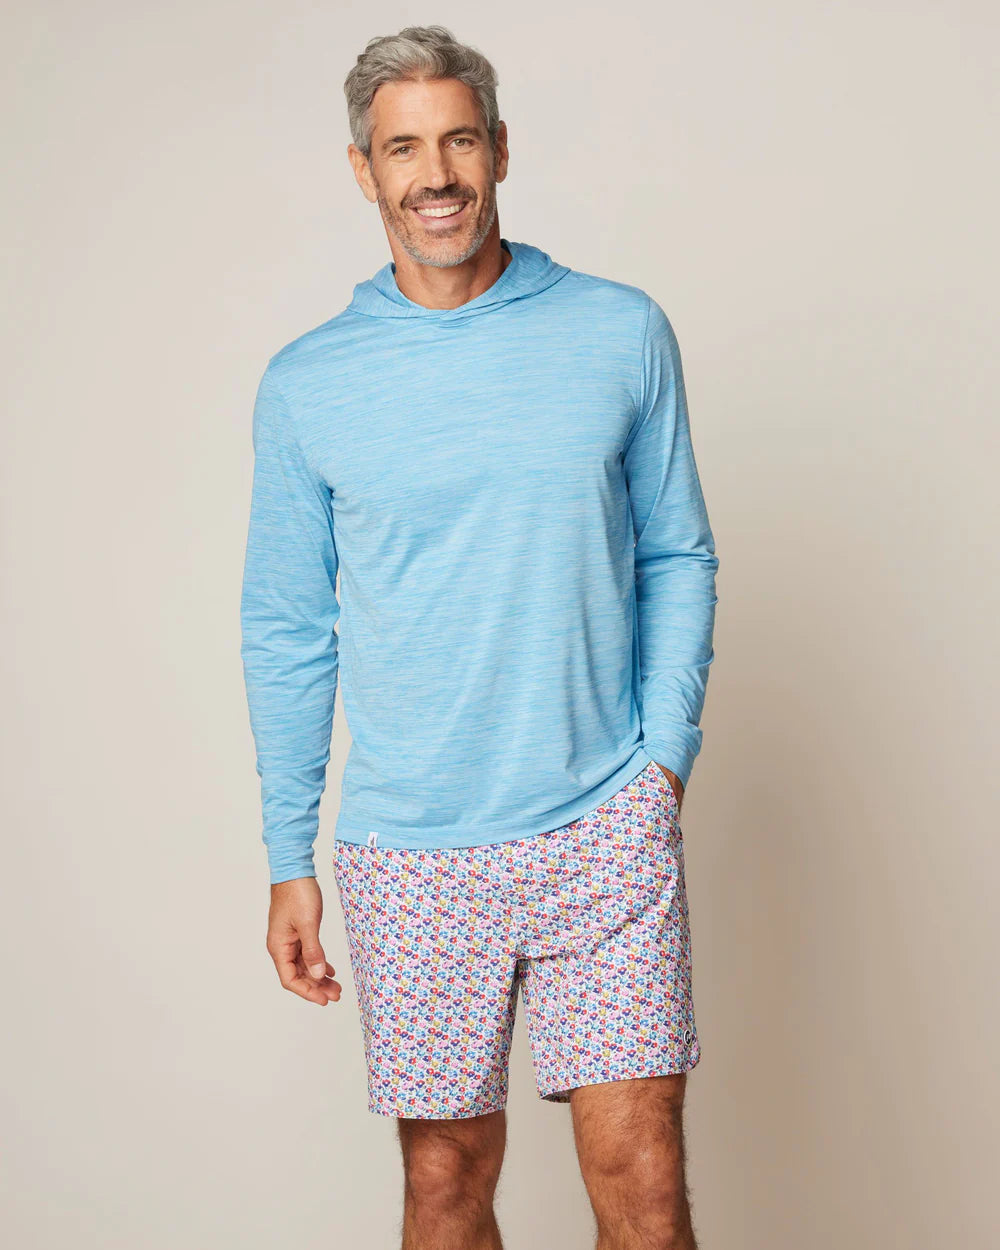 Keep cool and dry in the sunshine with this ultra lightweight, moisture wicking, and UPF 50 tee. Whether you're heading out on a morning walk, boat day, or just lounging by the pool, the buttery soft and smooth Talon is the perfect companion.